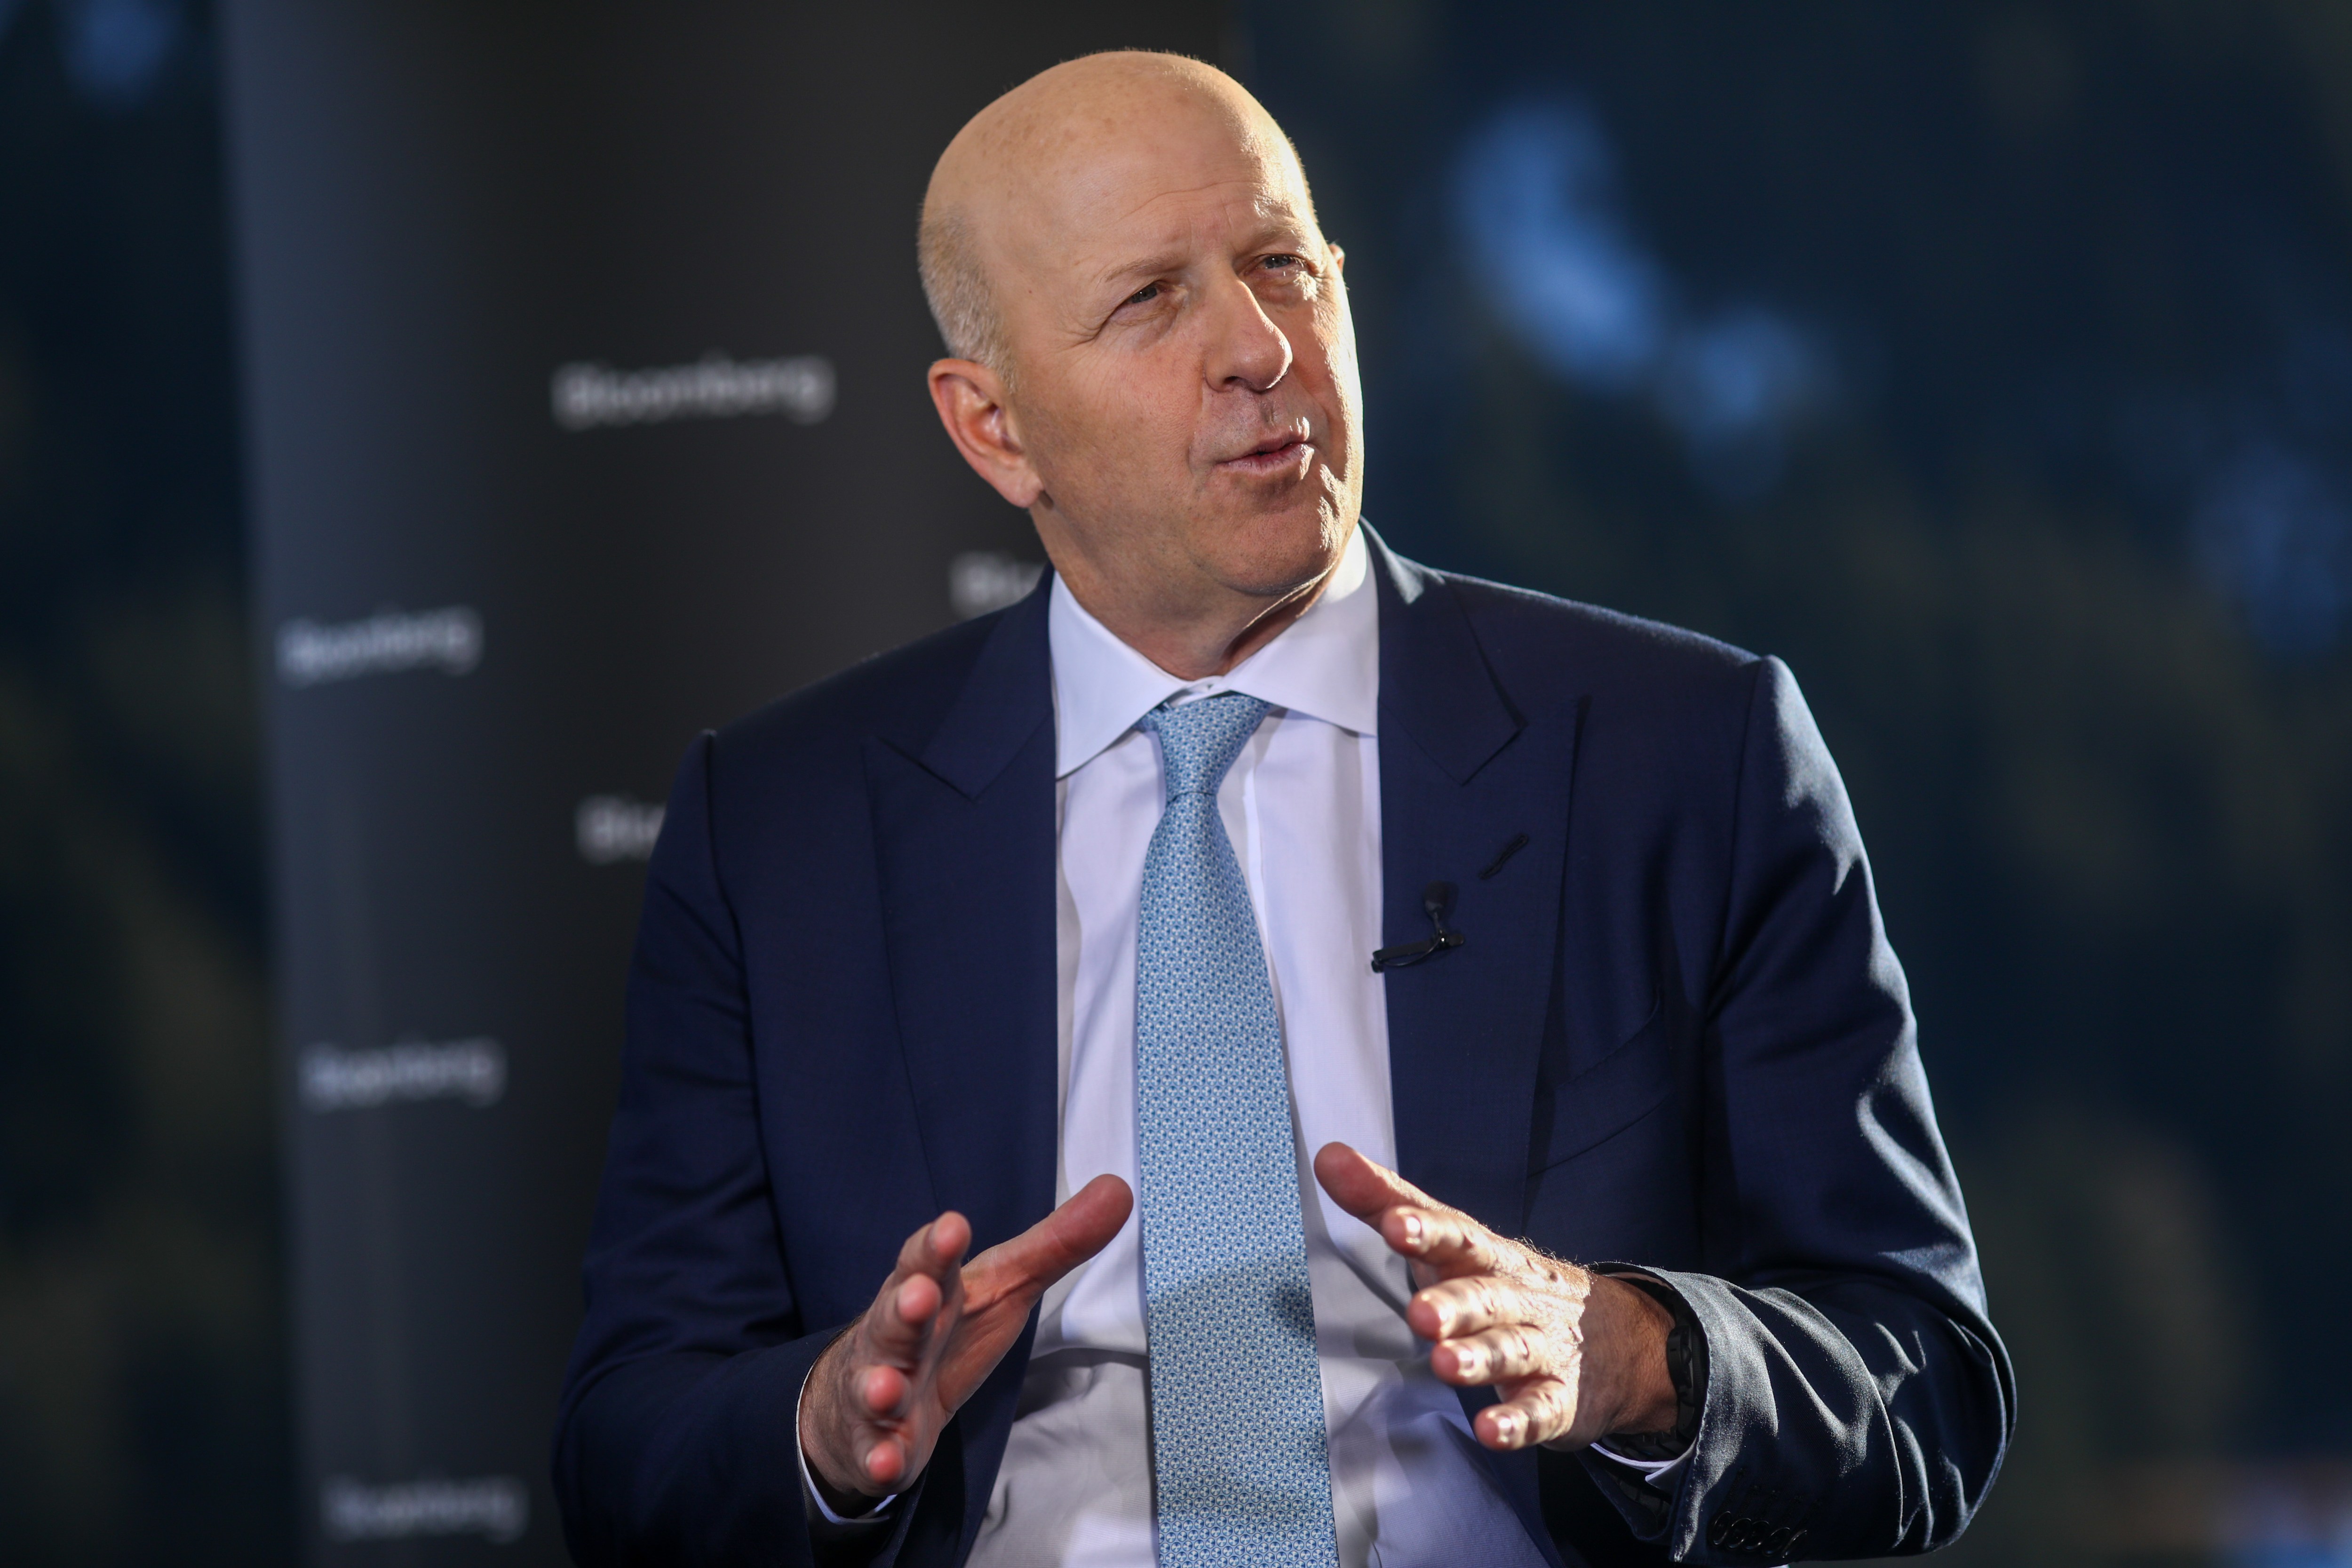 Surprise jump in profits at Goldman Sachs as deal-making recovers